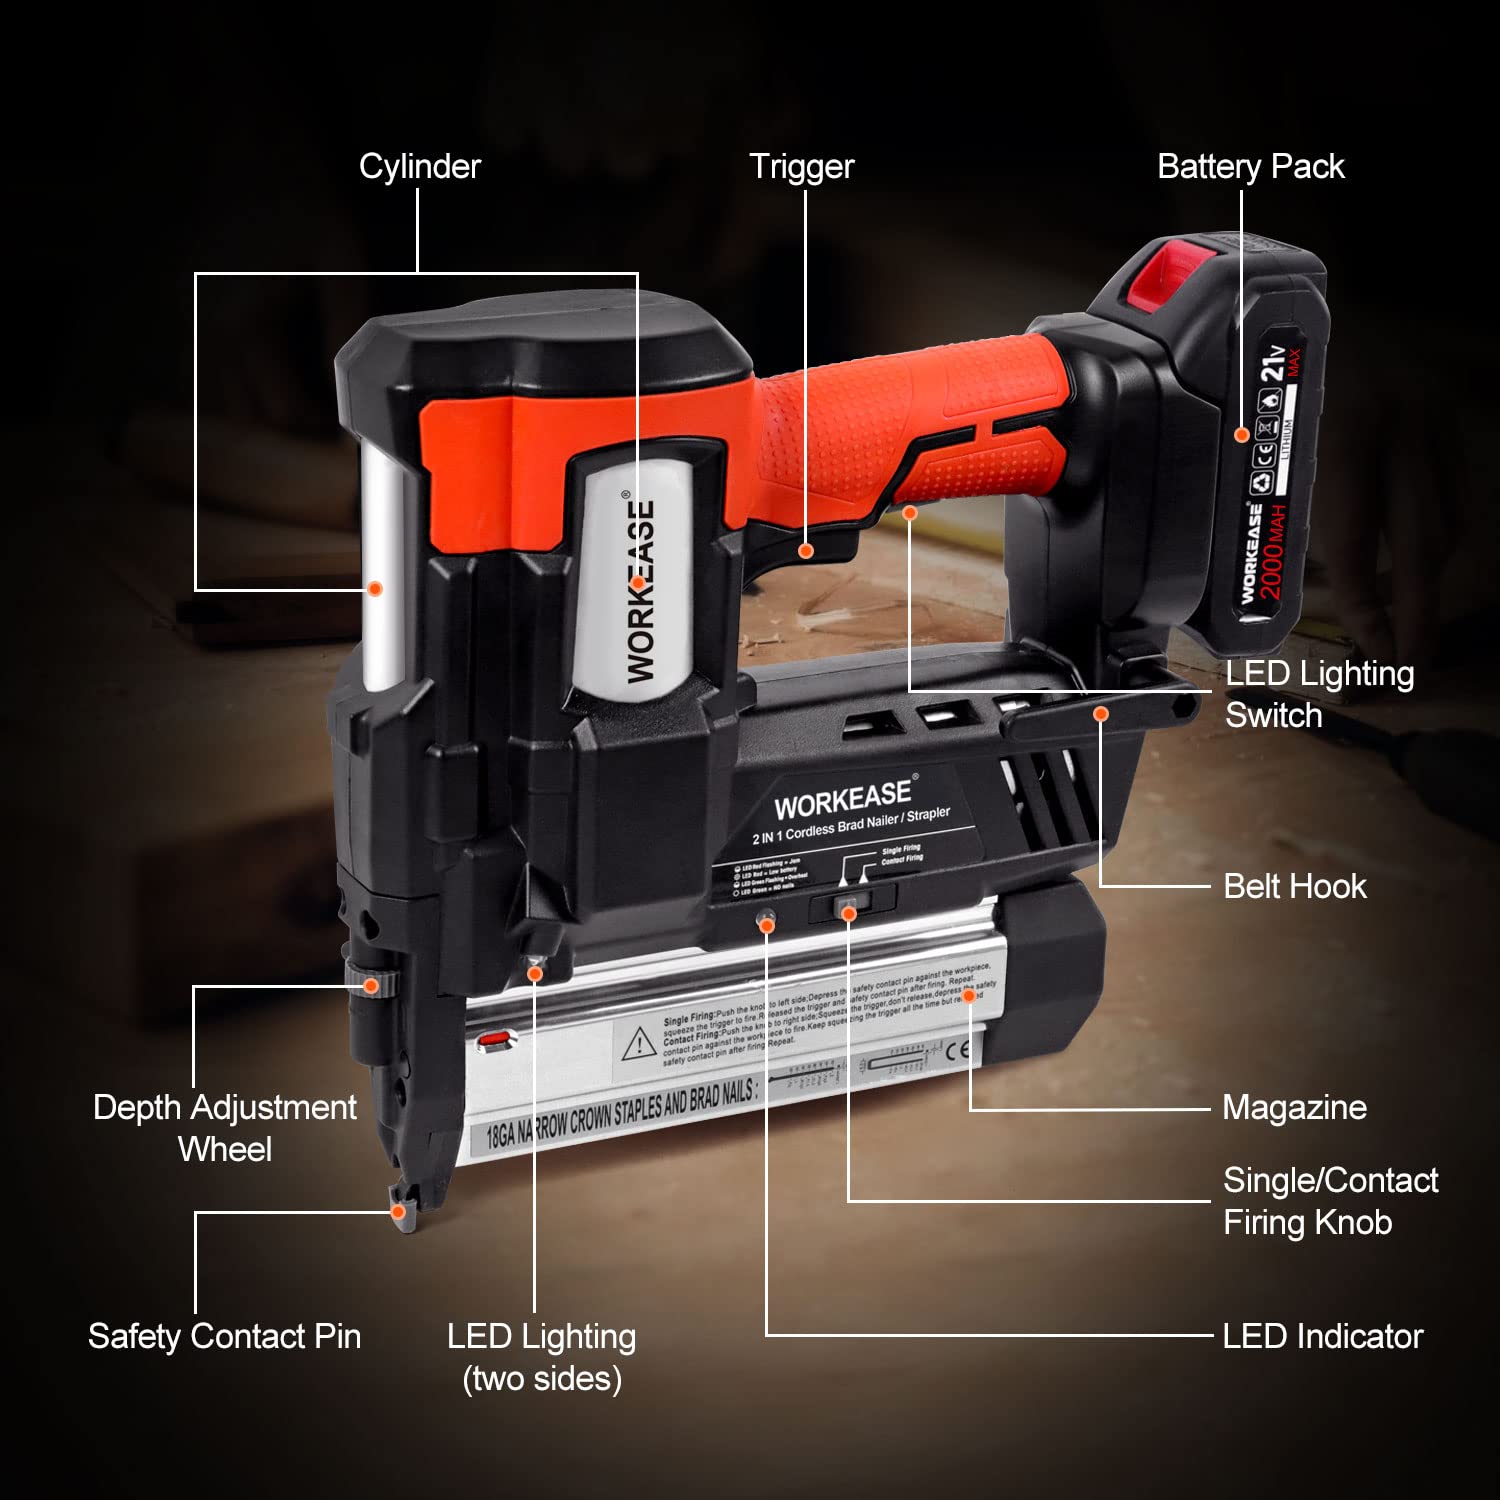 21V Cordless Brad Nailer, 18 Gauge 2 in 1 Nail Gun/Stapler Gun Battery Powered with 2.0Ah Battery, Fast Charger, 2000 Nails & Staples, Earplugs, Electric Staple Gun for Furniture Woodworking